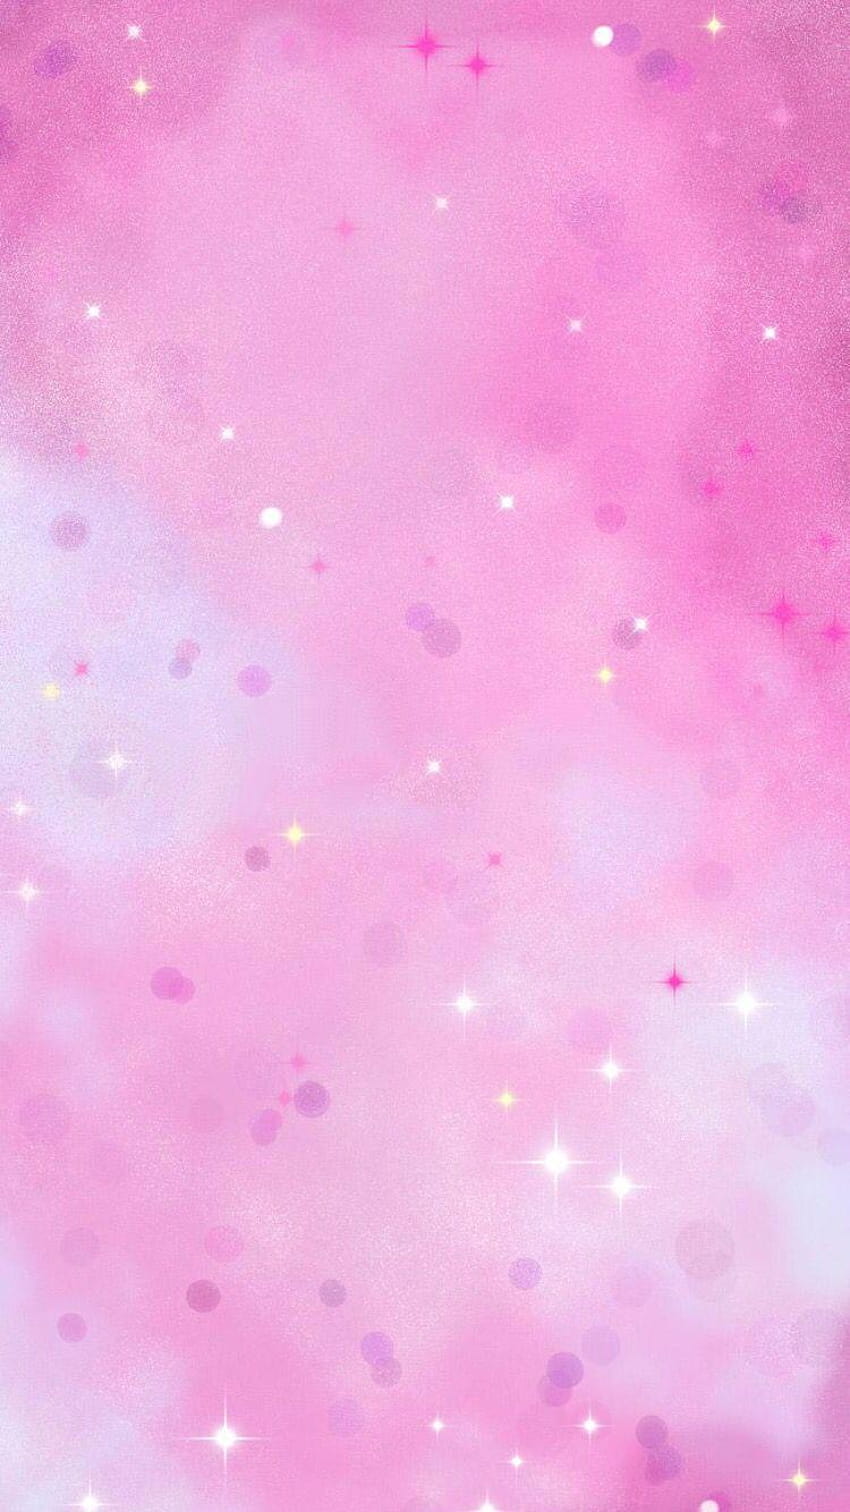 result for sprinkles themed papers, galaxy pink HD phone wallpaper